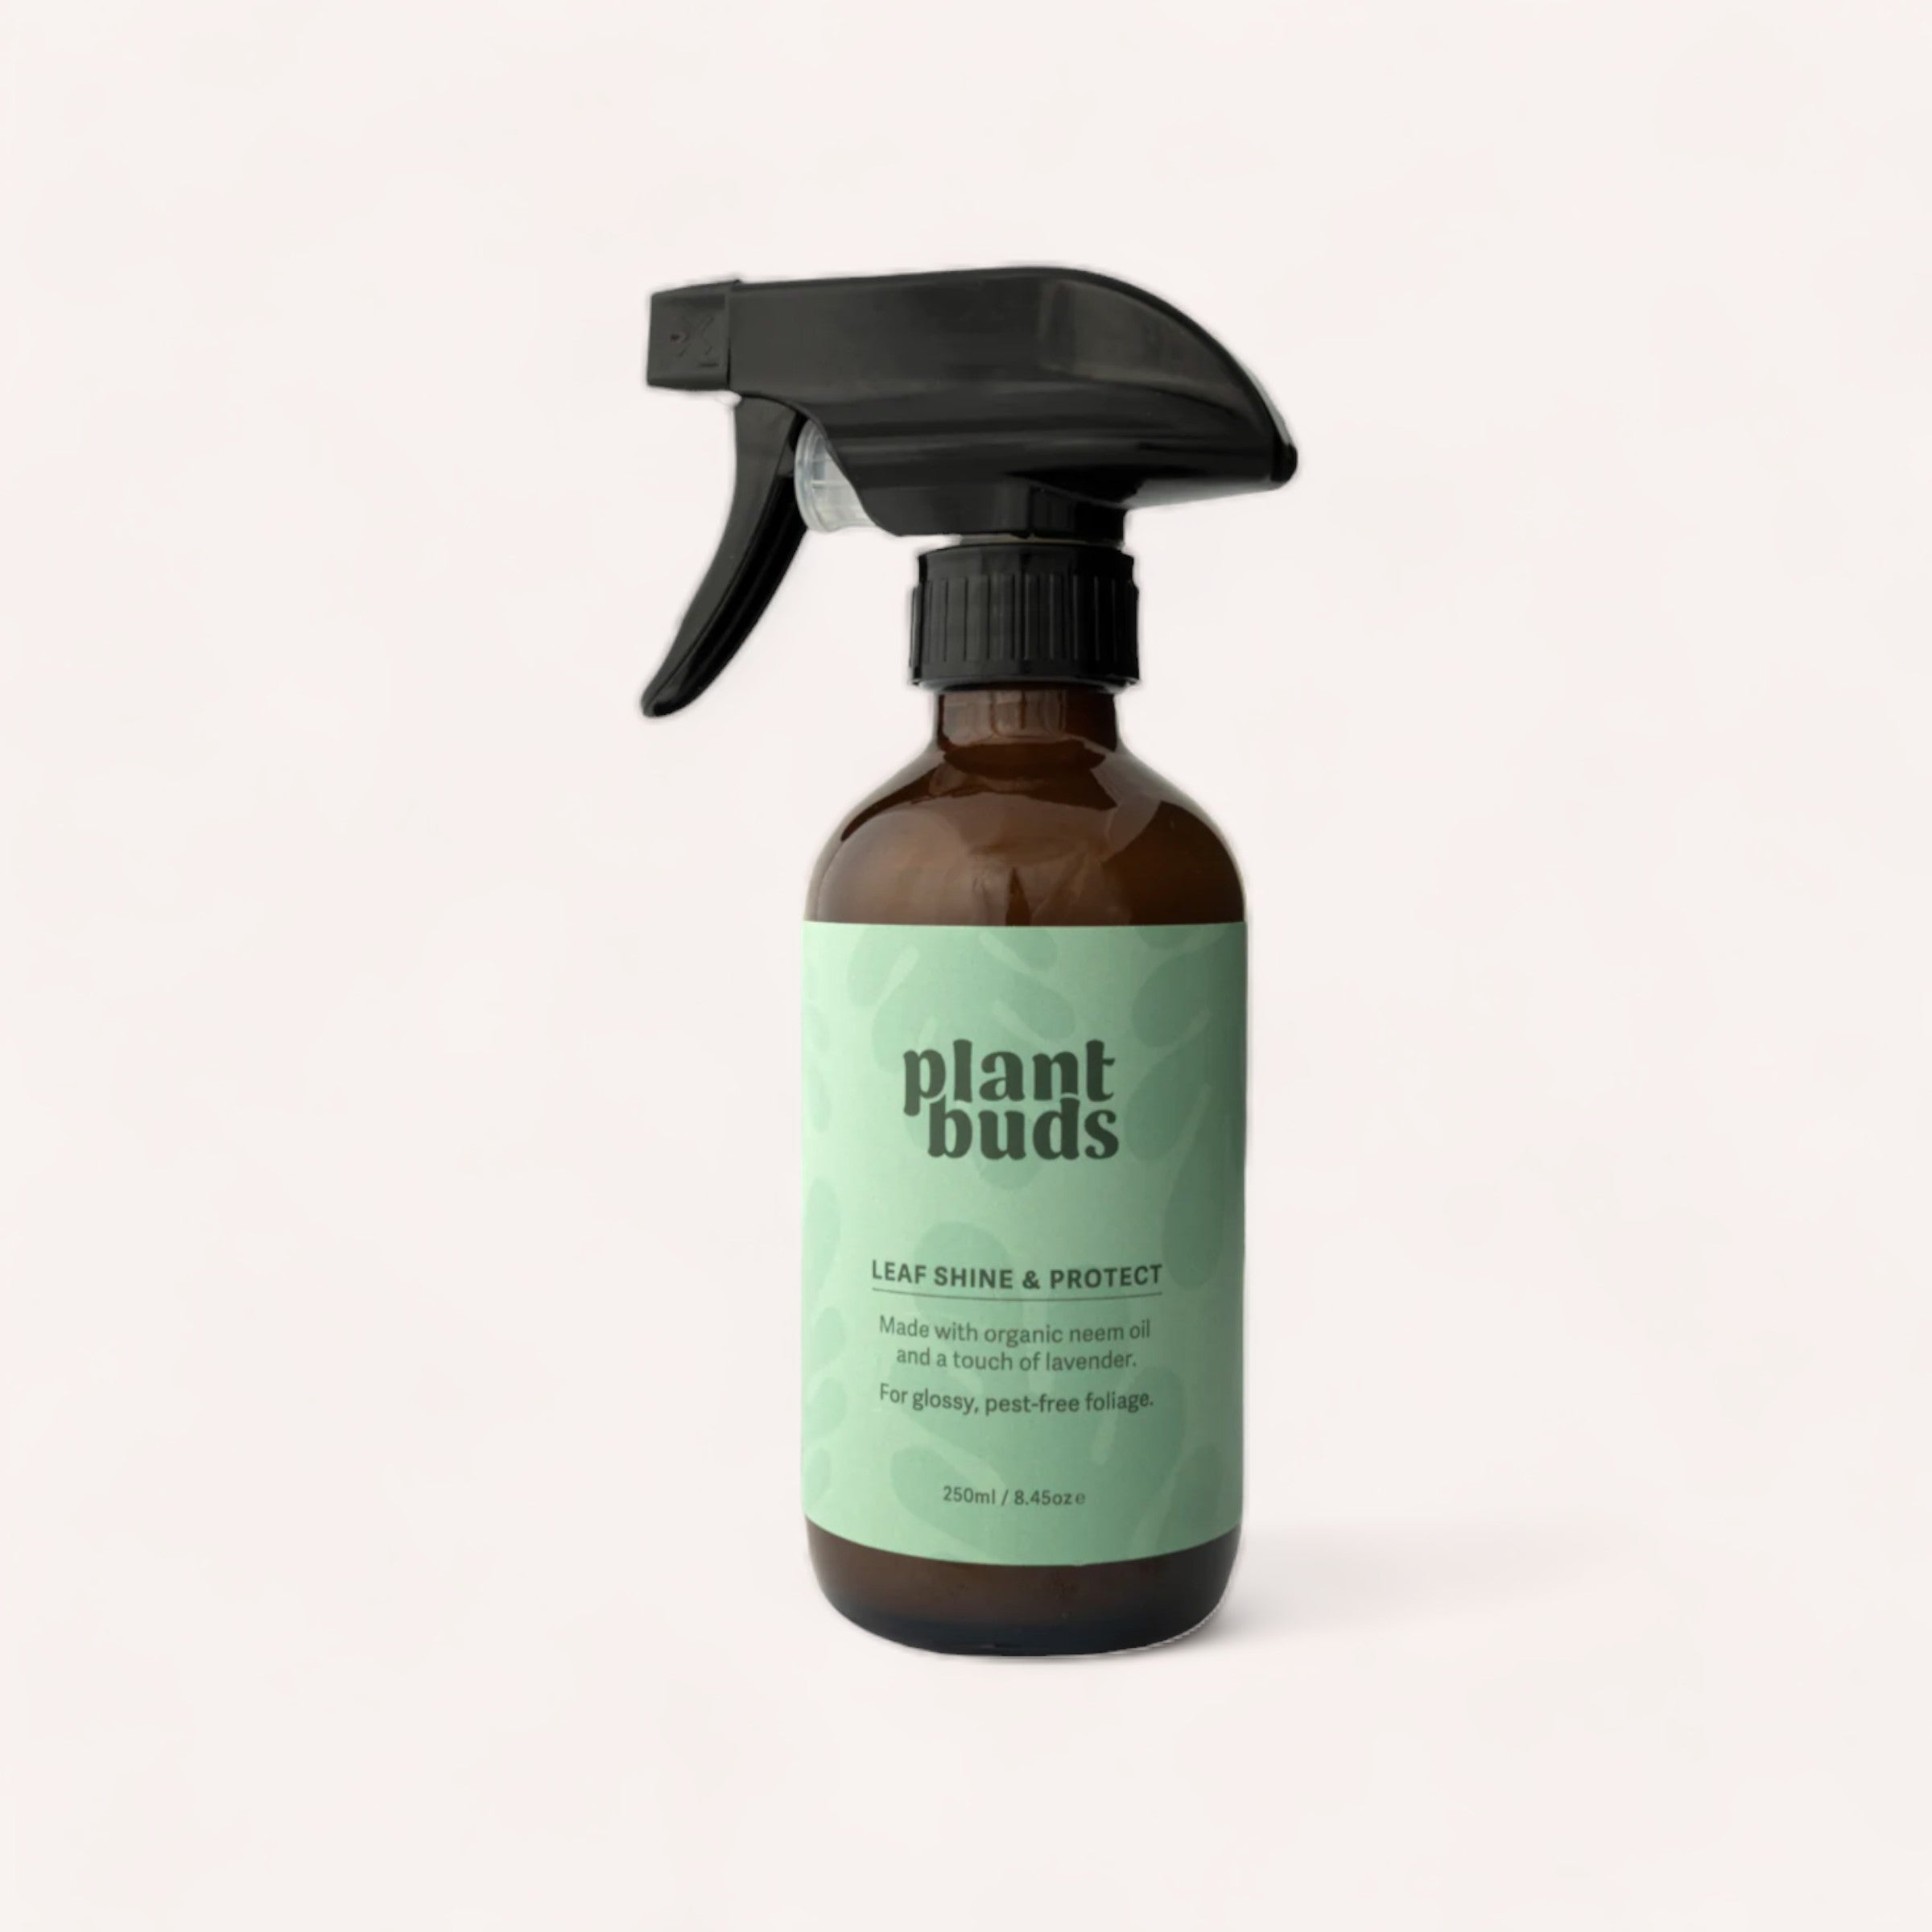 A spray bottle labeled "Leaf Shine & Protect by Plantbuds" for leaf shine and protection, contains organic neem oil, against a clean white background.